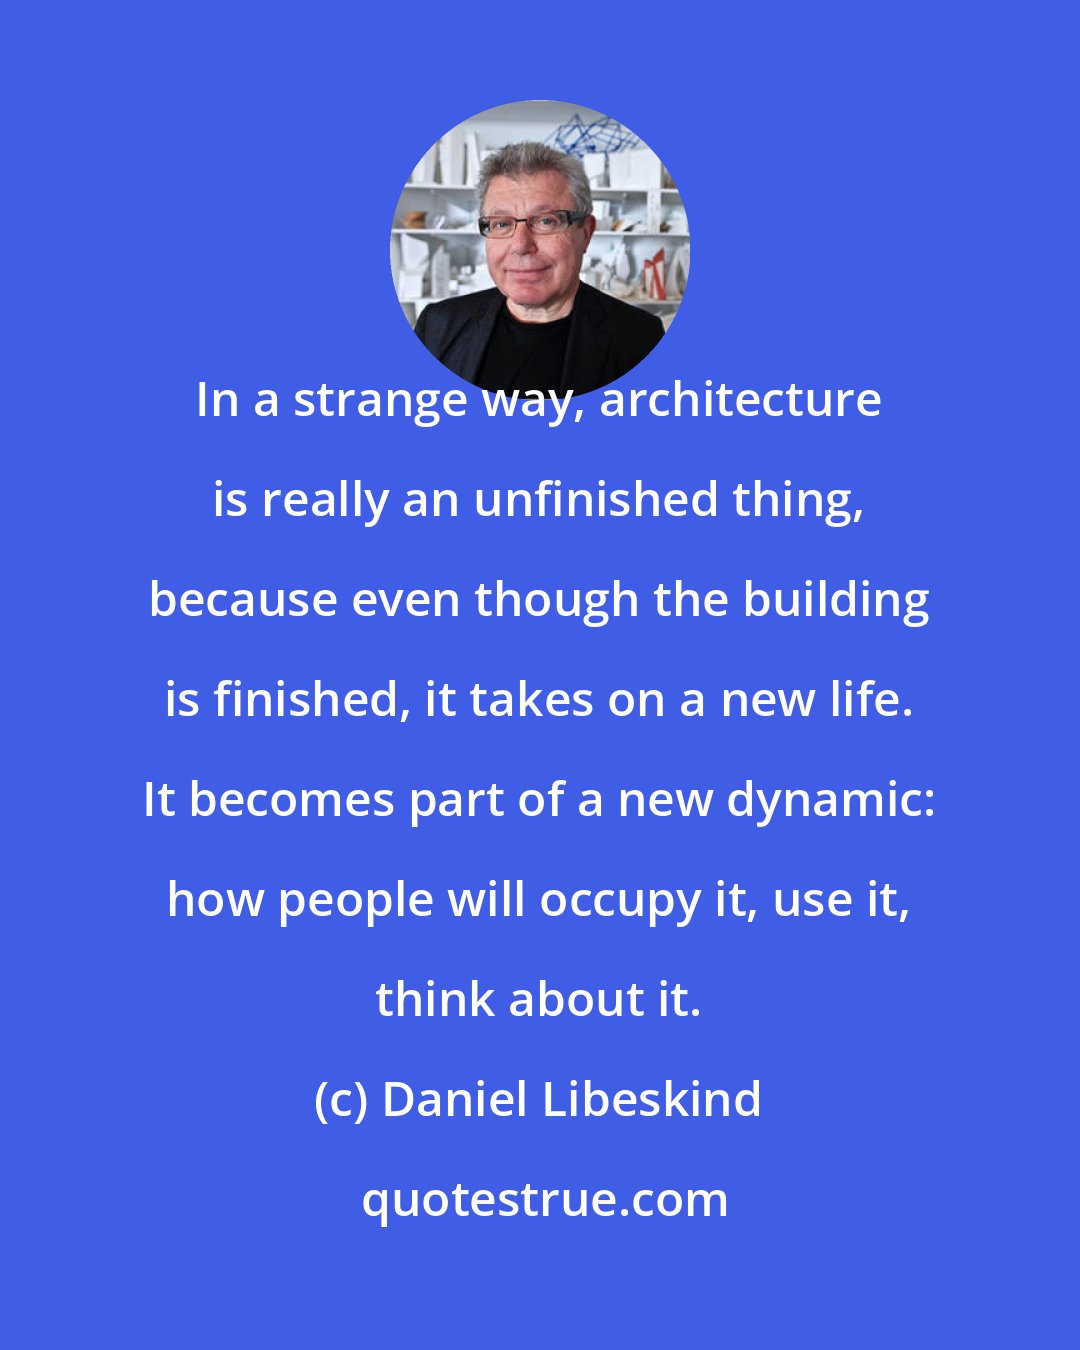 Daniel Libeskind: In a strange way, architecture is really an unfinished thing, because even though the building is finished, it takes on a new life. It becomes part of a new dynamic: how people will occupy it, use it, think about it.